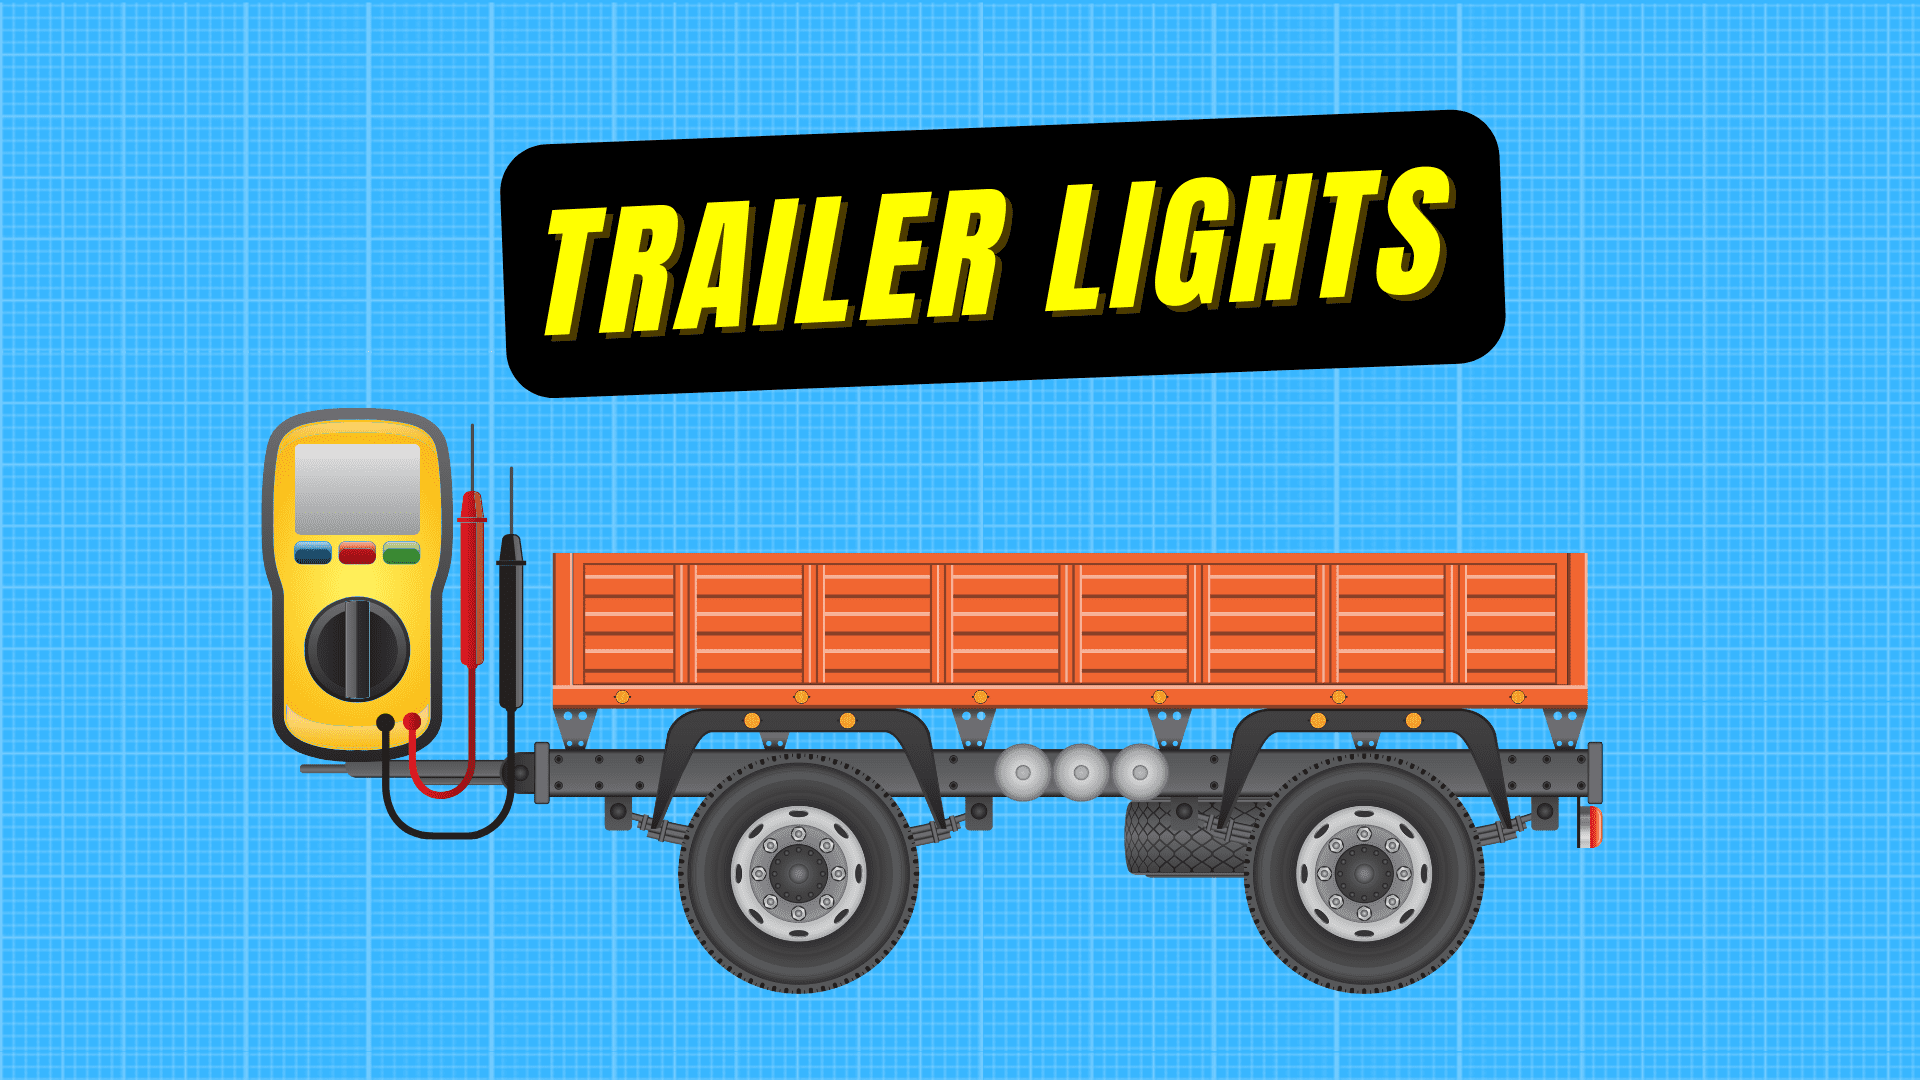 How to Test Trailer Lights with a Multimeter